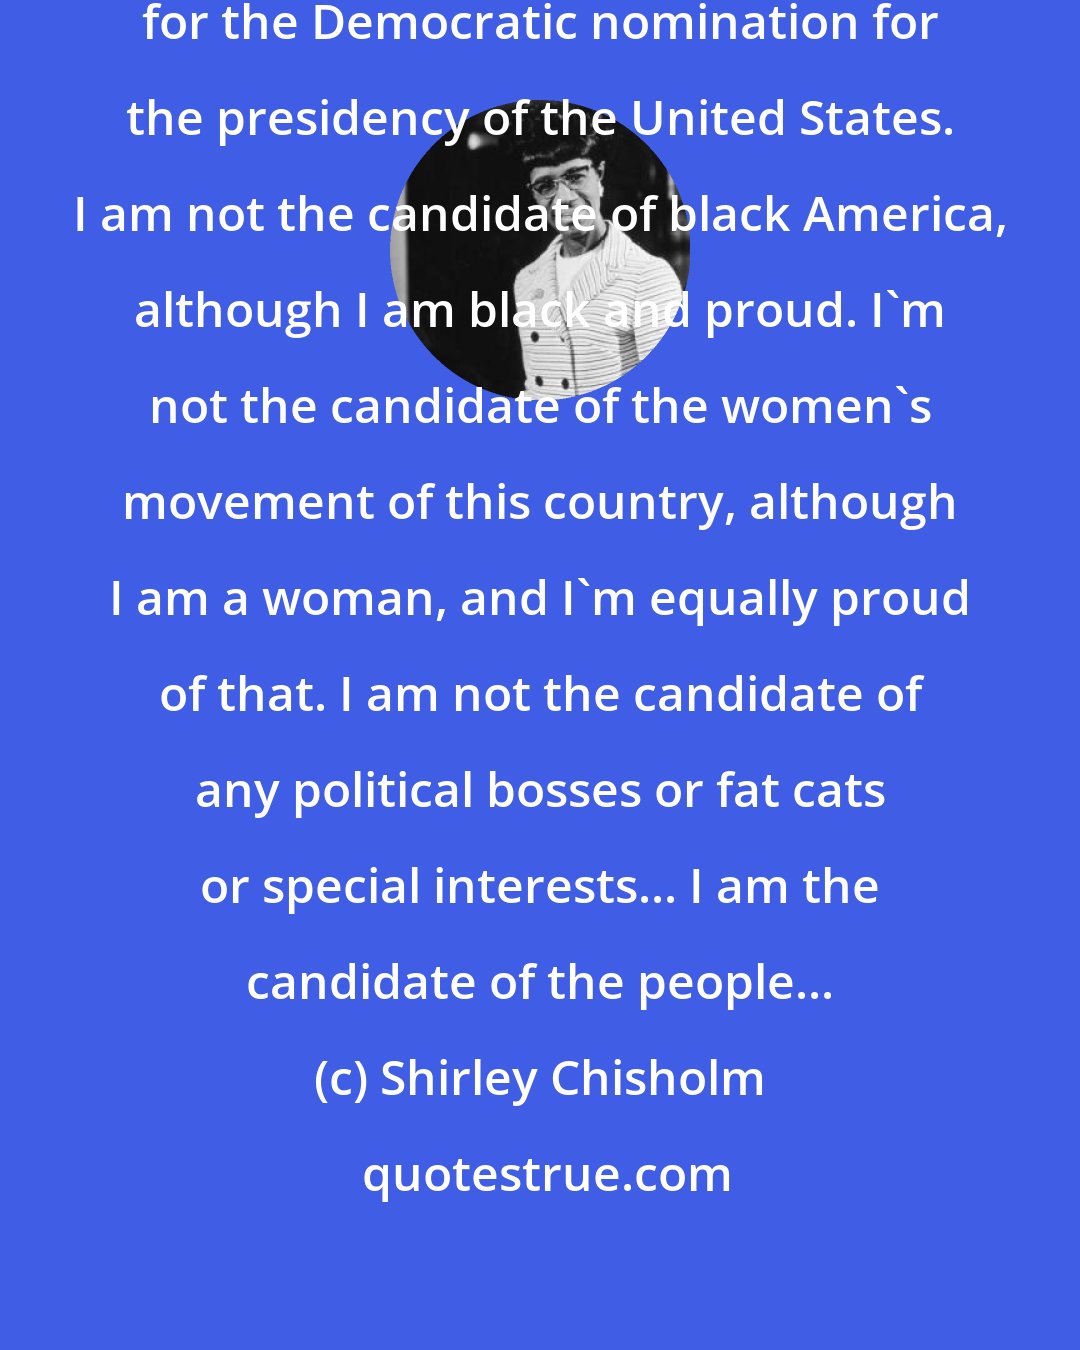 Shirley Chisholm: I stand before you today as a candidate for the Democratic nomination for the presidency of the United States. I am not the candidate of black America, although I am black and proud. I'm not the candidate of the women's movement of this country, although I am a woman, and I'm equally proud of that. I am not the candidate of any political bosses or fat cats or special interests... I am the candidate of the people...